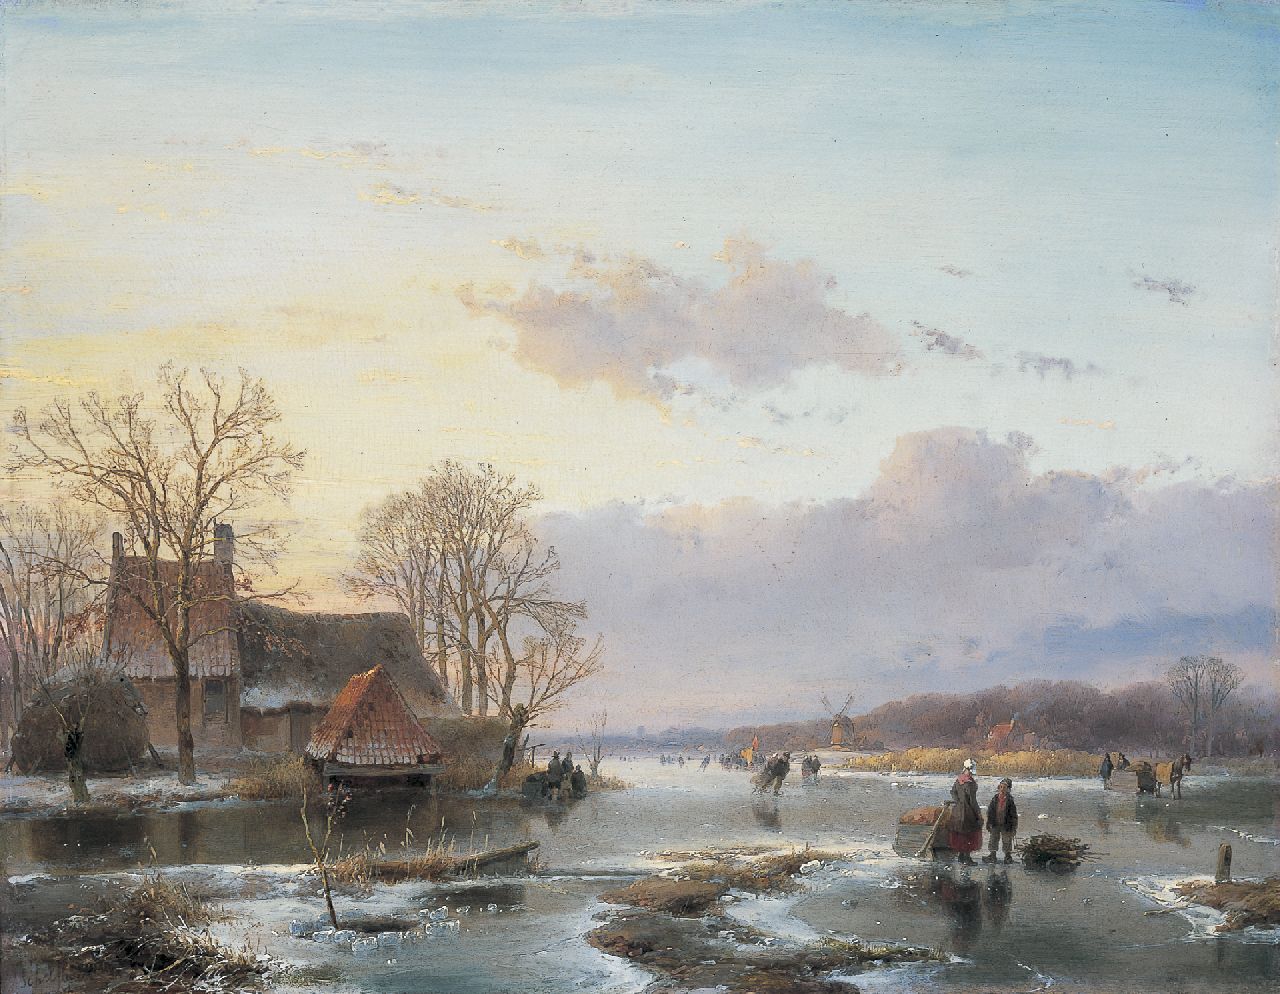 Schelfhout A.  | Andreas Schelfhout, Skaters on a frozen polder canal, Öl auf Holz 37,6 x 48,4 cm, signed l.l. und painted circa 1845